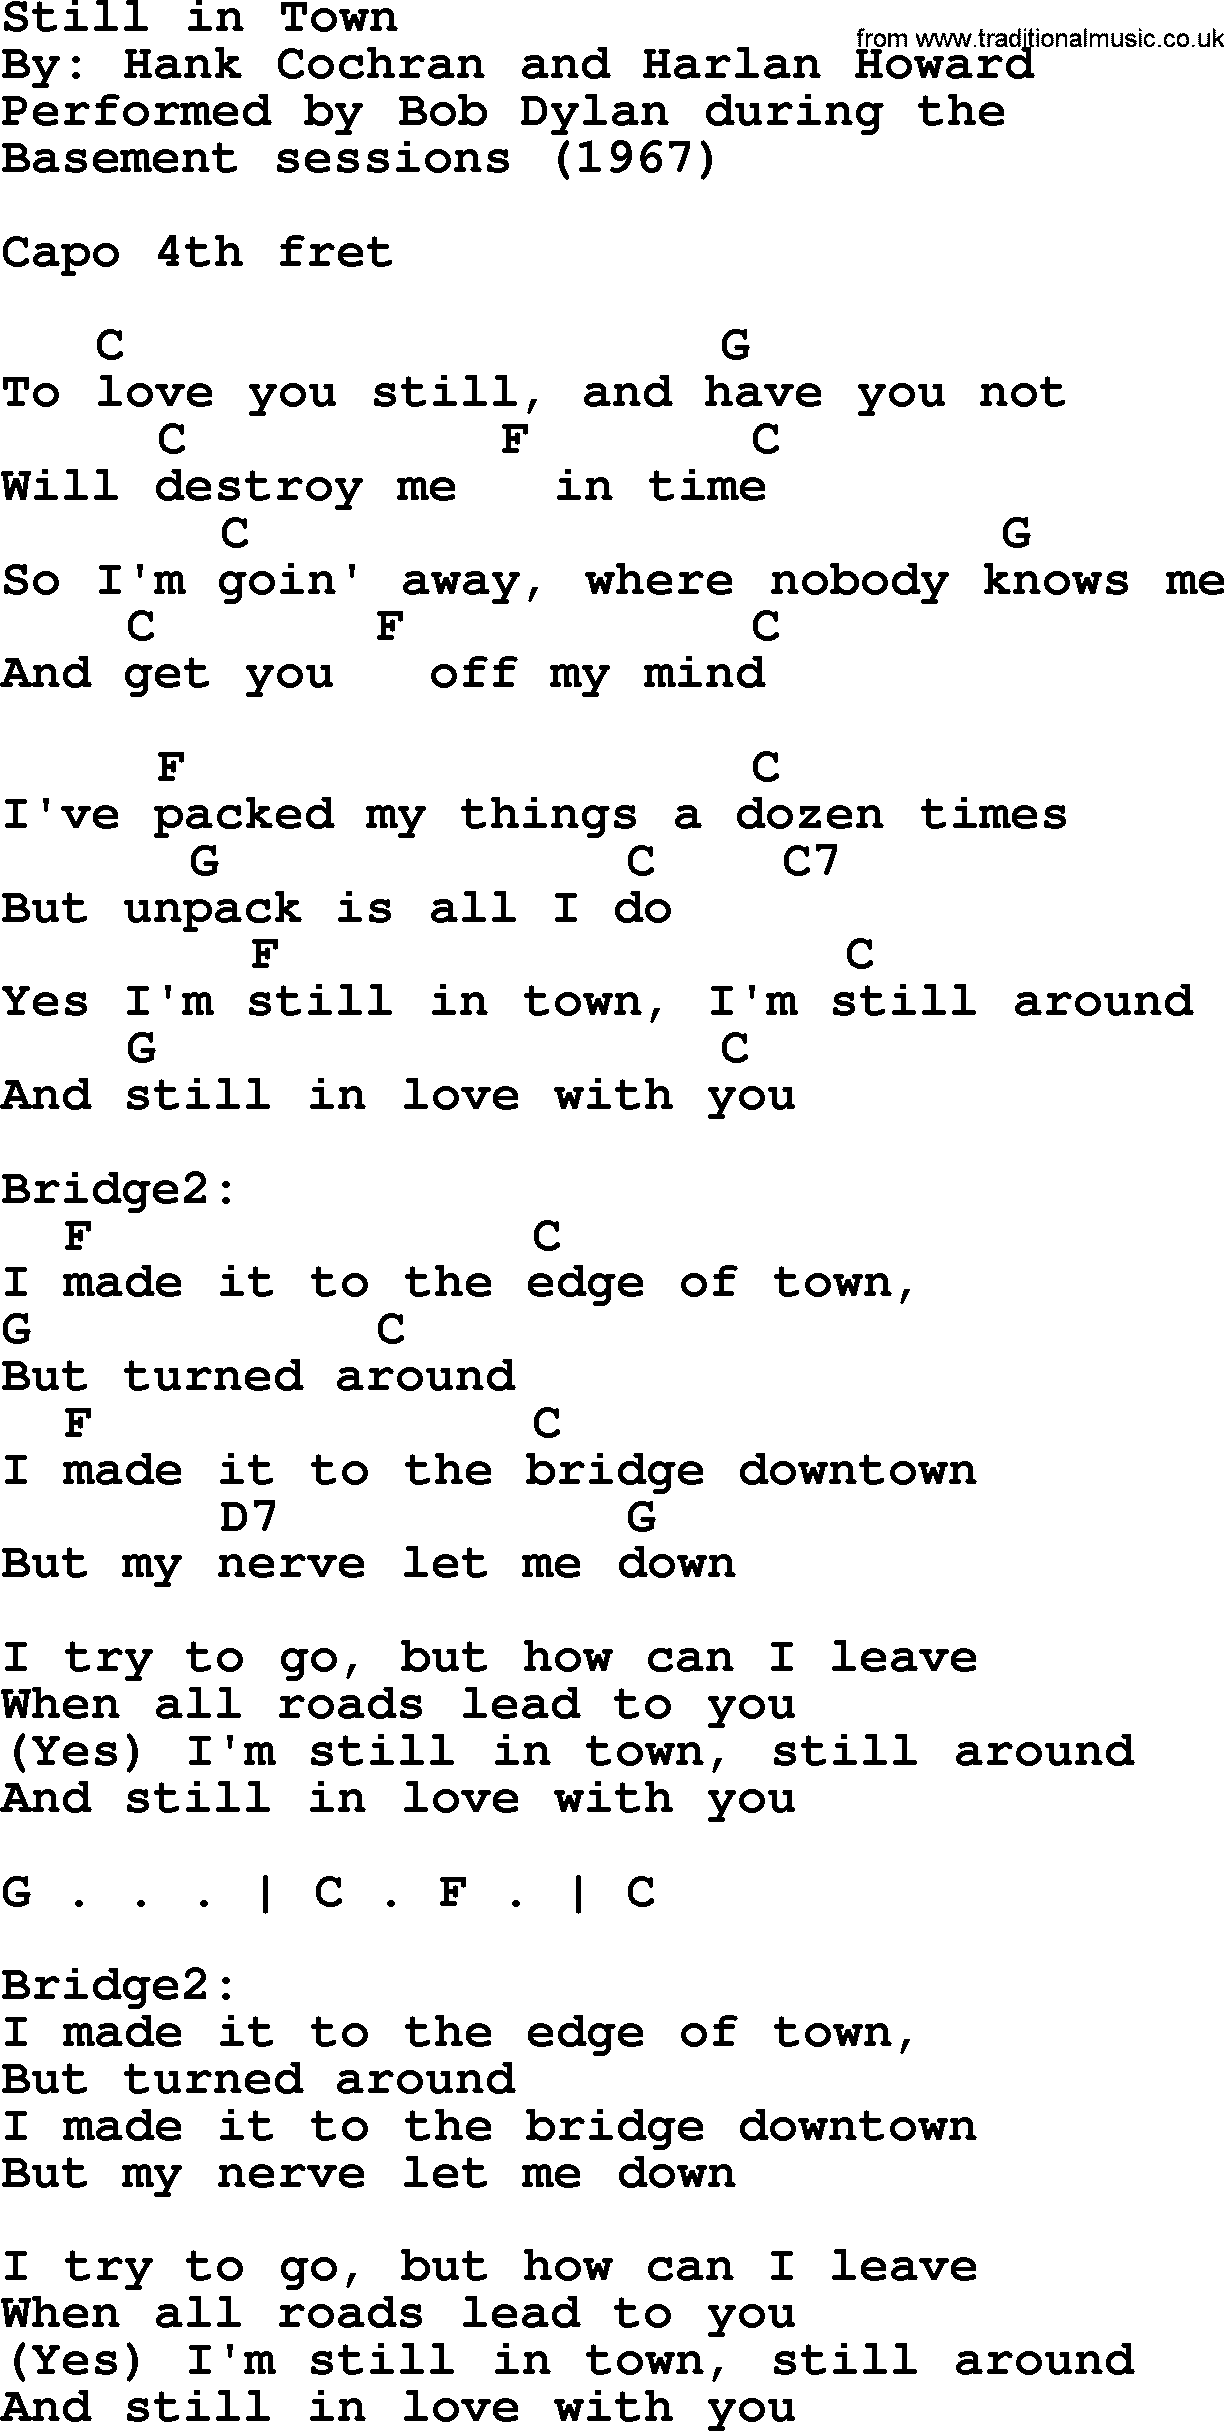 Bob Dylan song, lyrics with chords - Still in Town